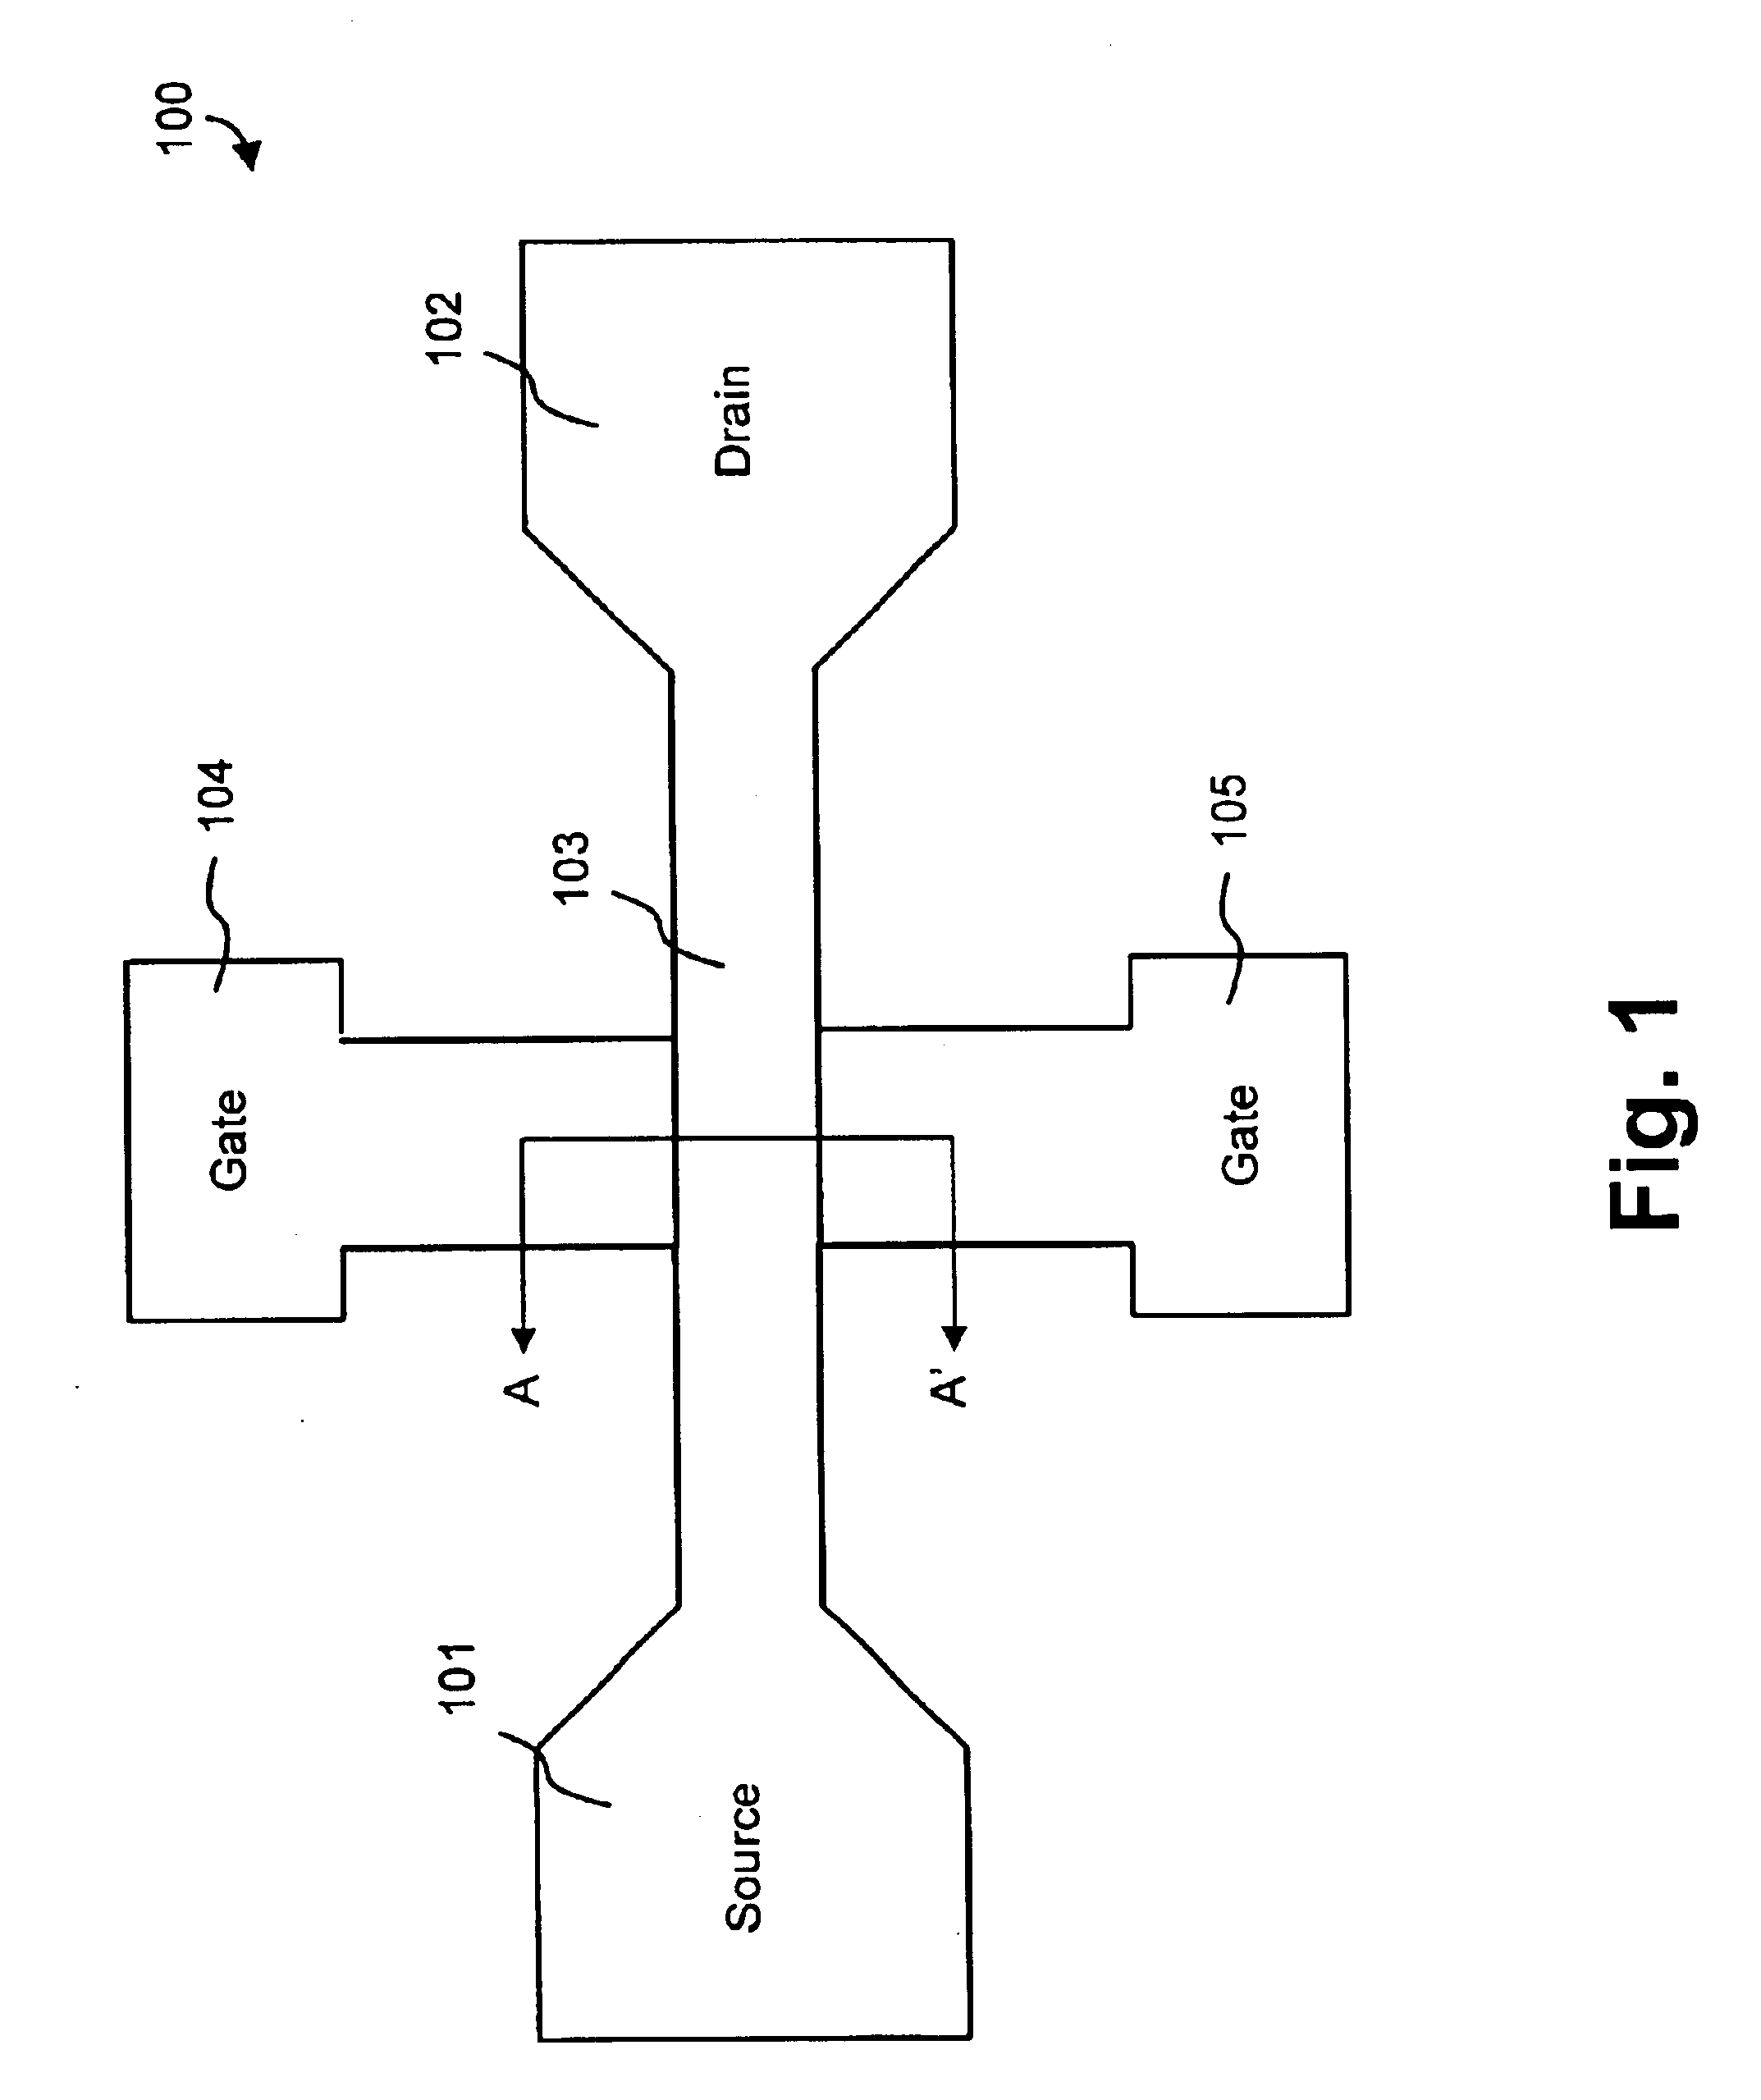 Two transistor NOR device